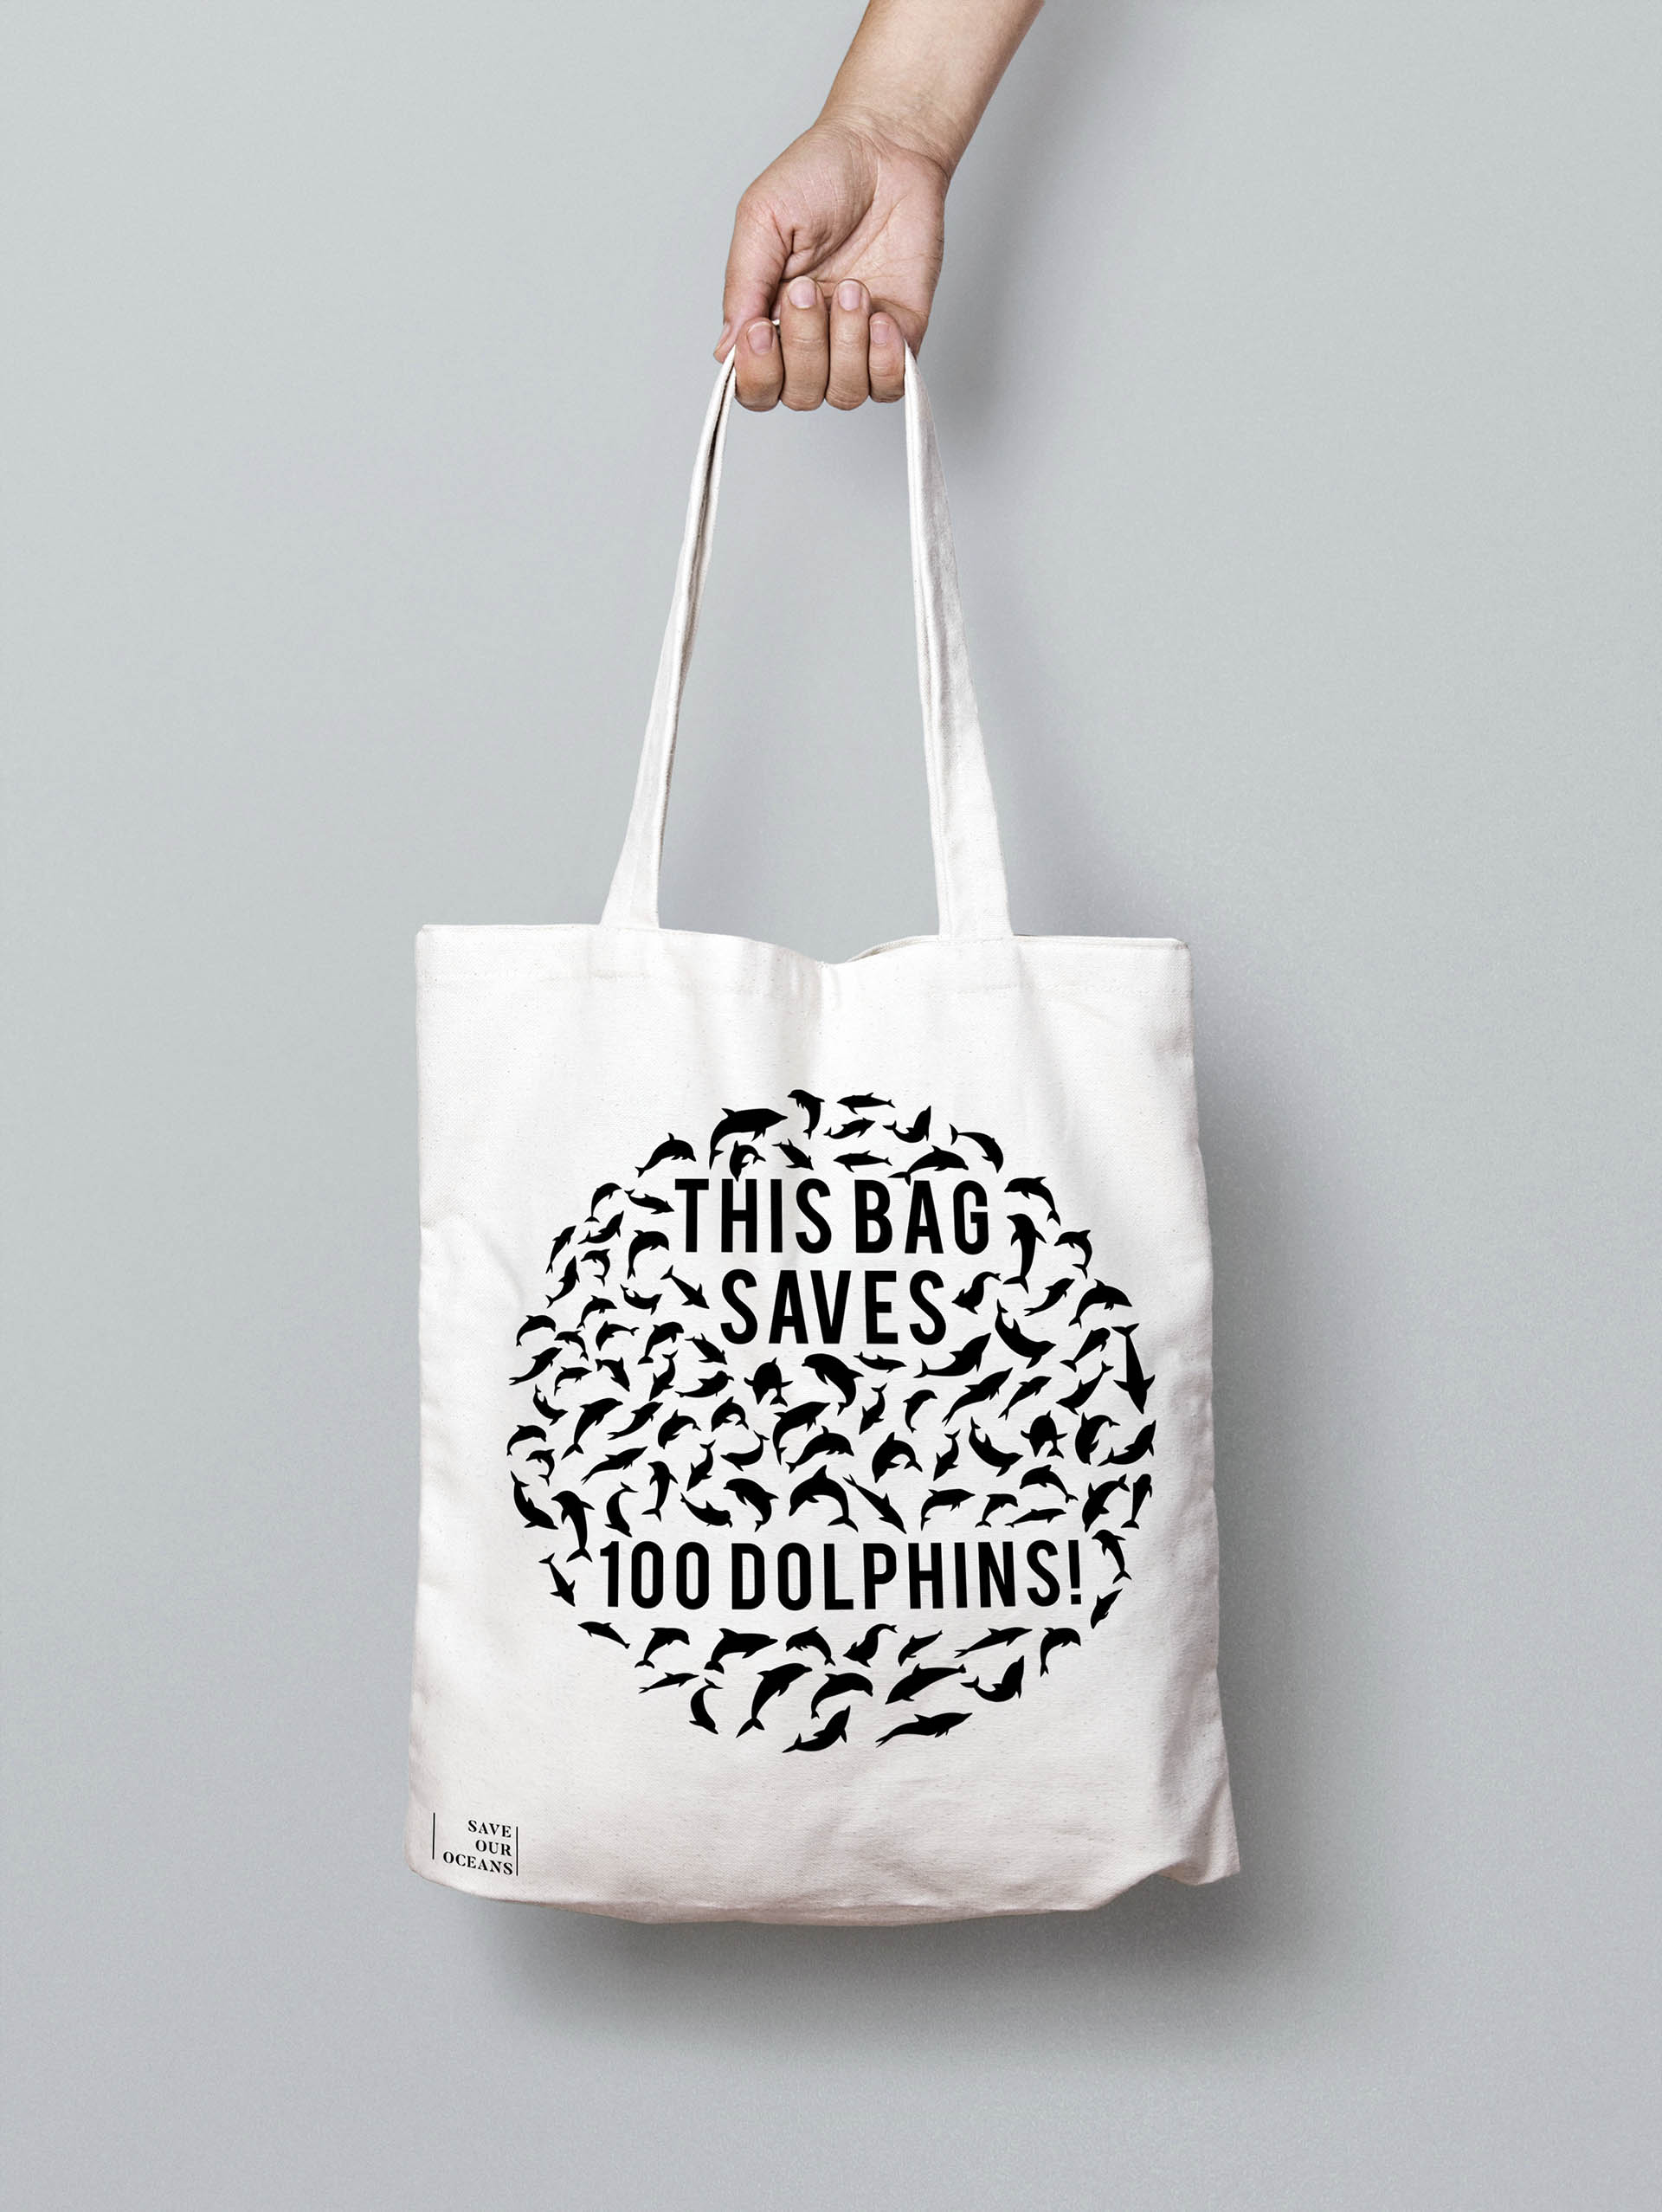 Sustainable canvas bag to promote Save Our Oceans